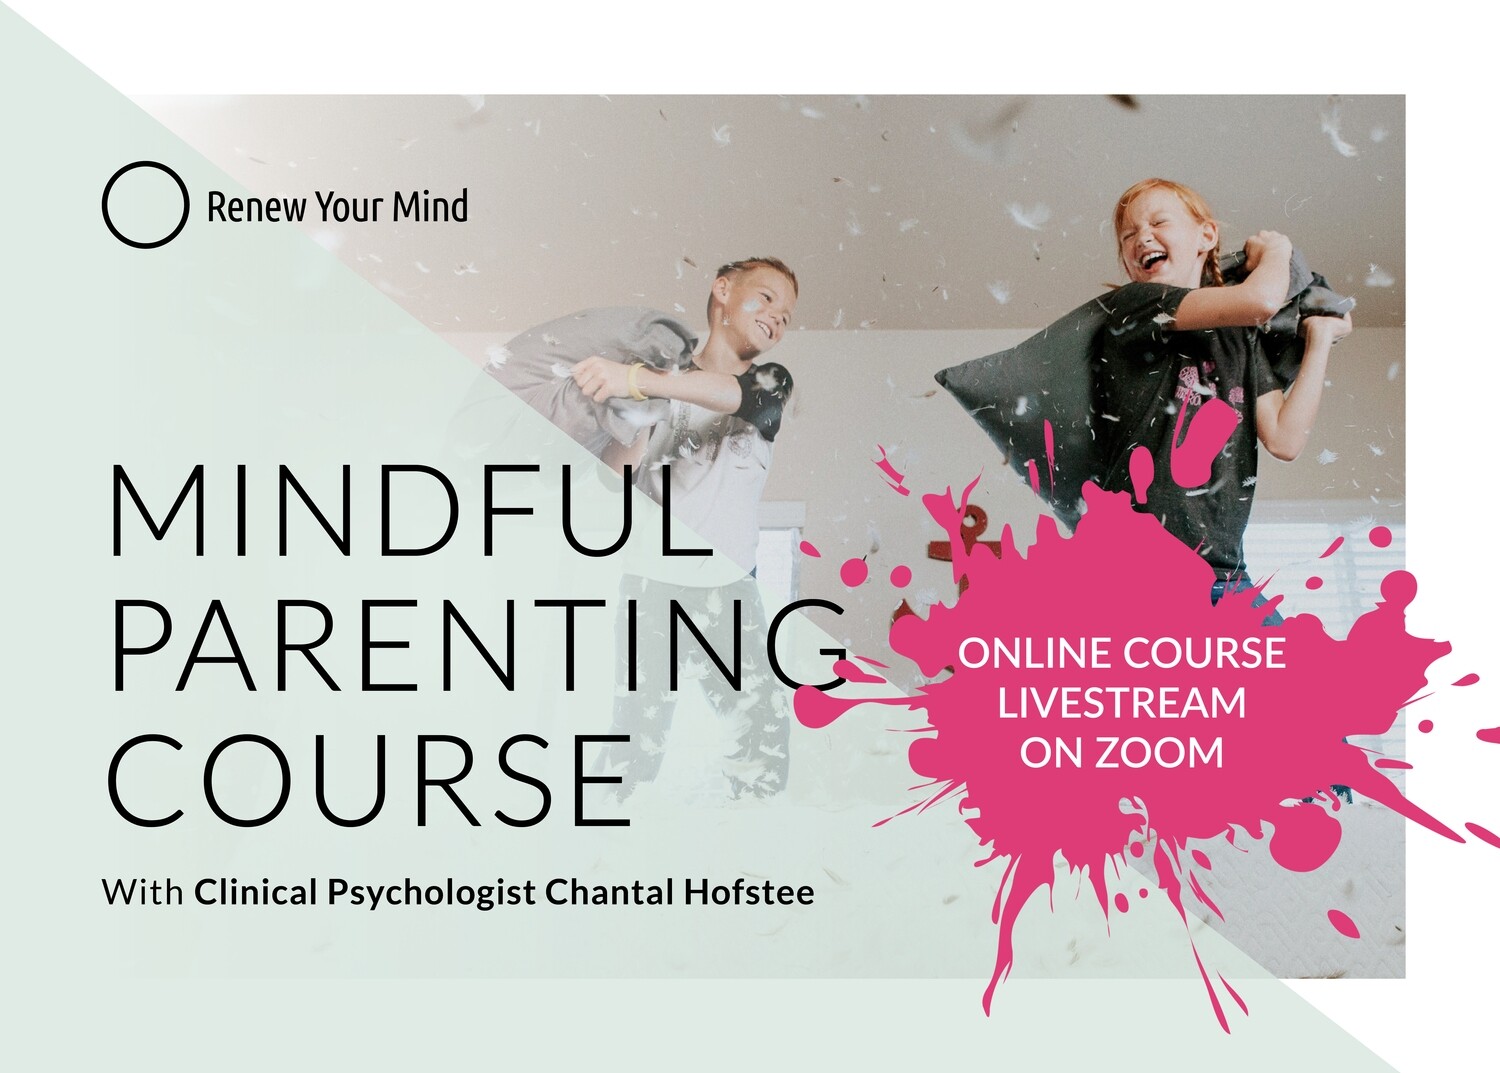 Online Mindful Parenting course term 4: 6 session course, Thurs Oct 26th '23